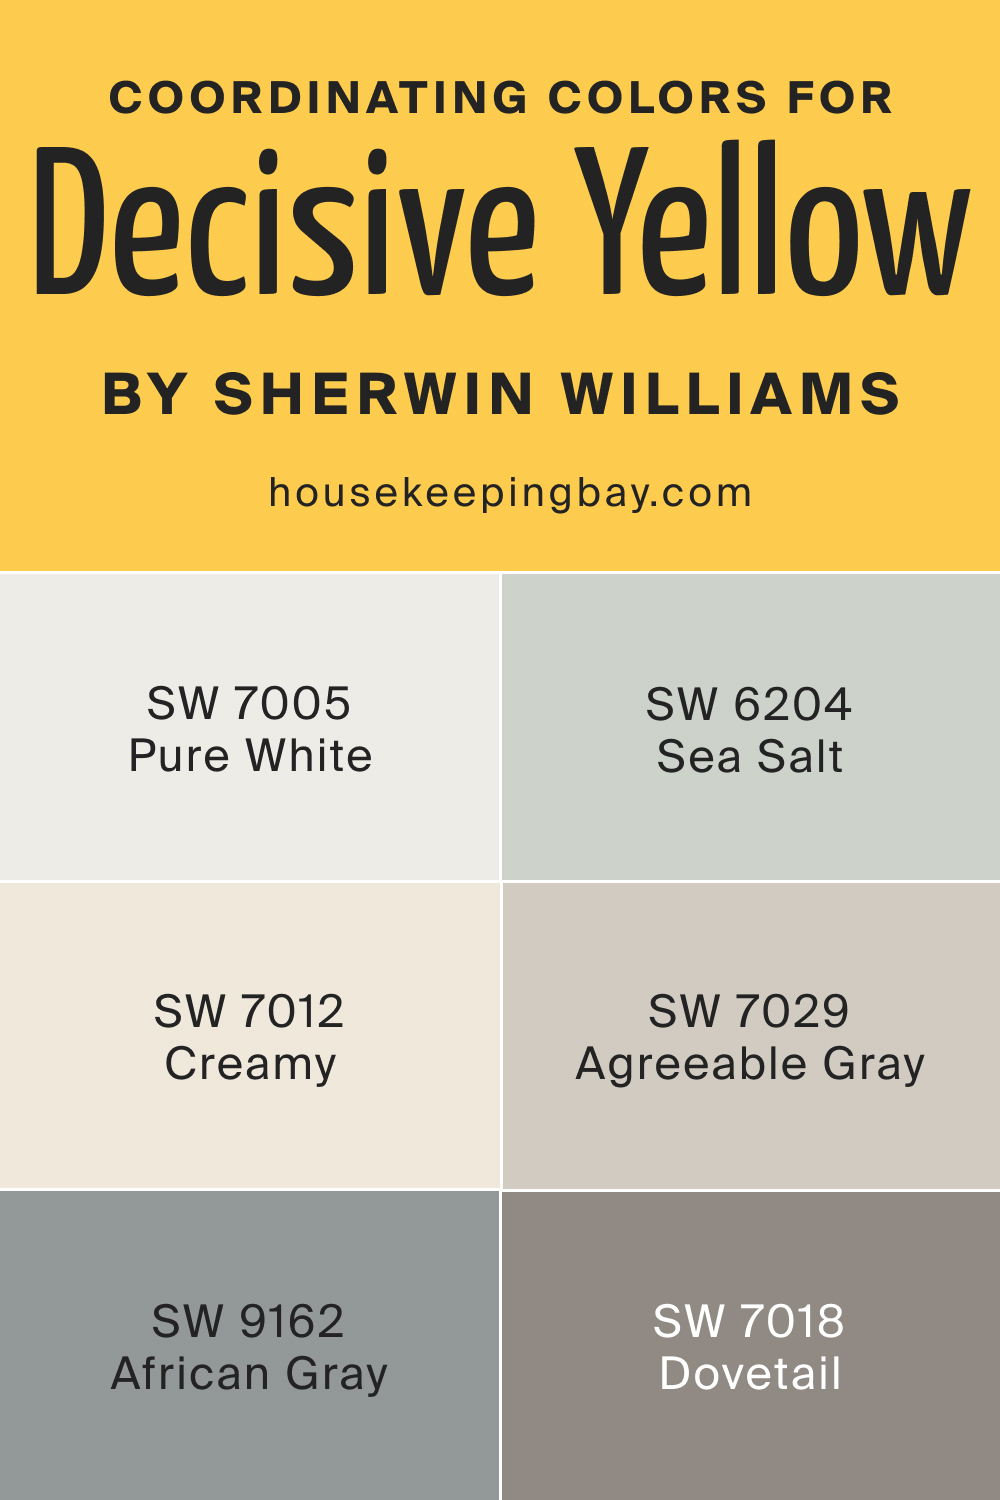 Coordinating Colors for Decisive Yellow SW 6902 by Sherwin Williams